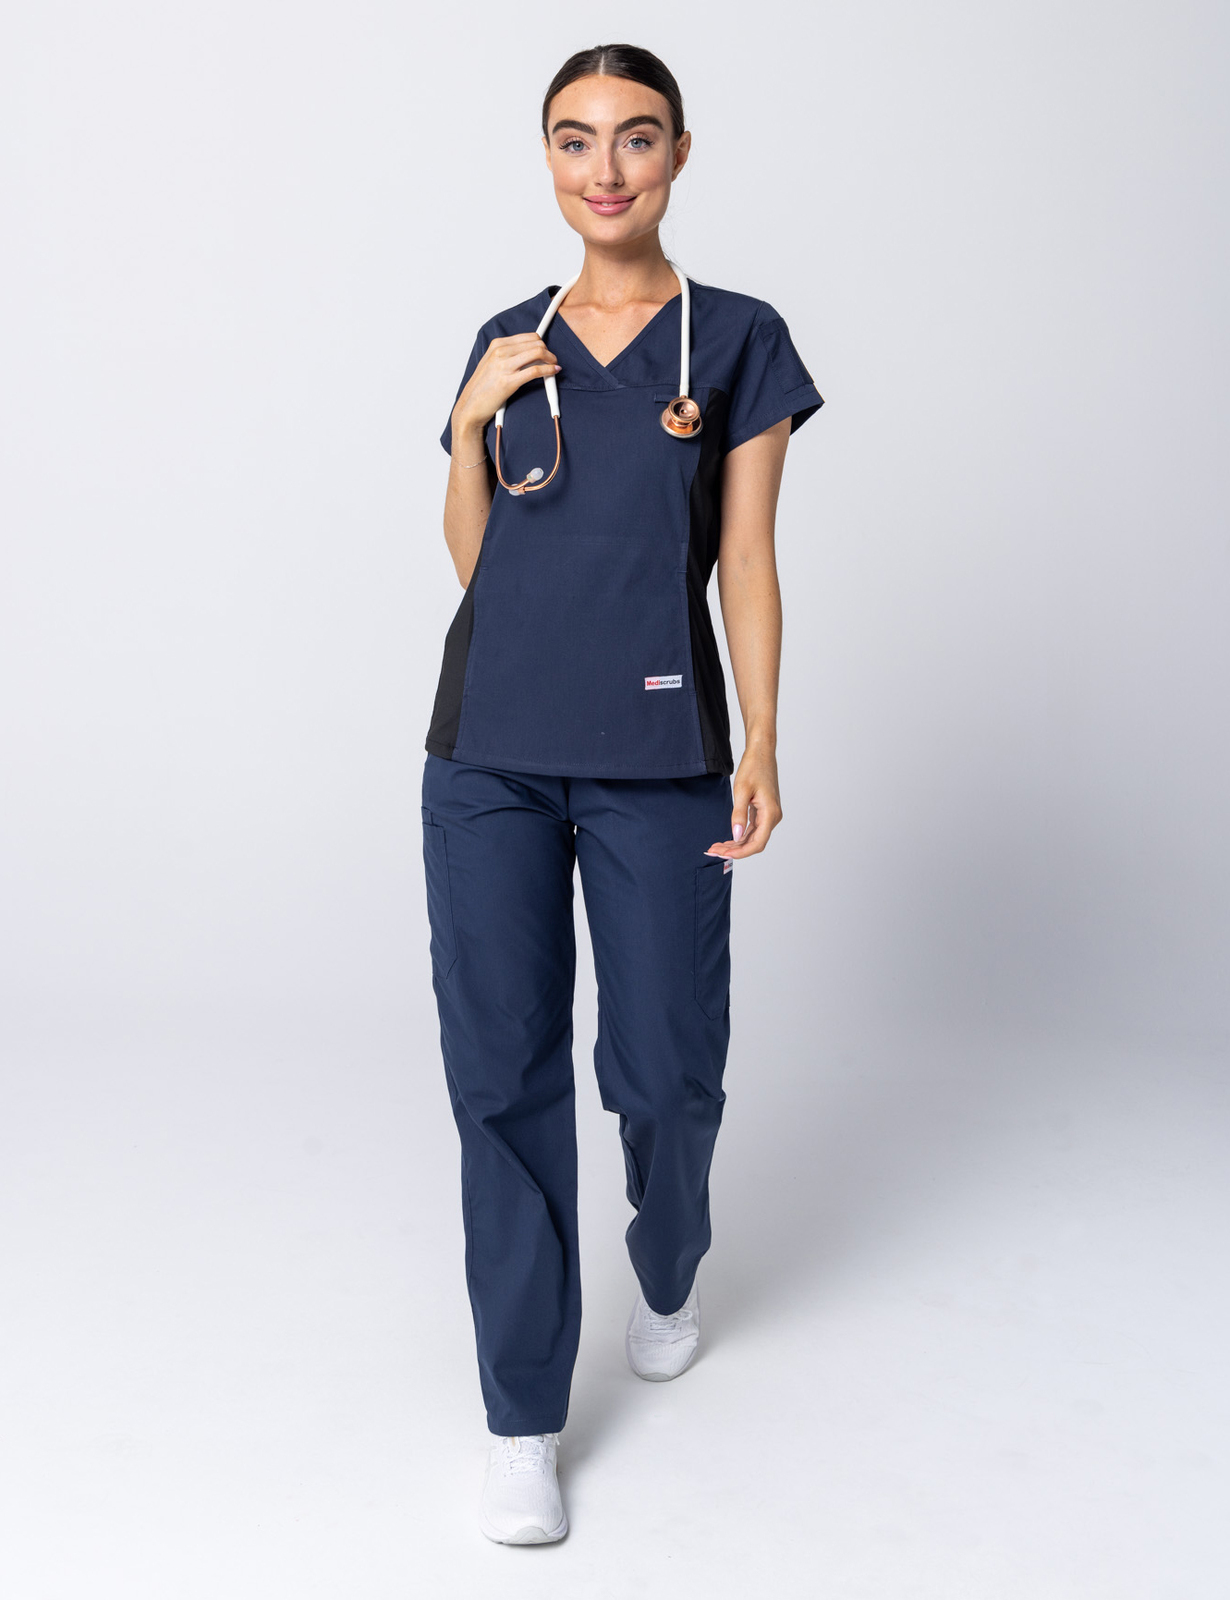 Women's Fit Solid Scrub Top With Spandex Panel - Navy - X Small